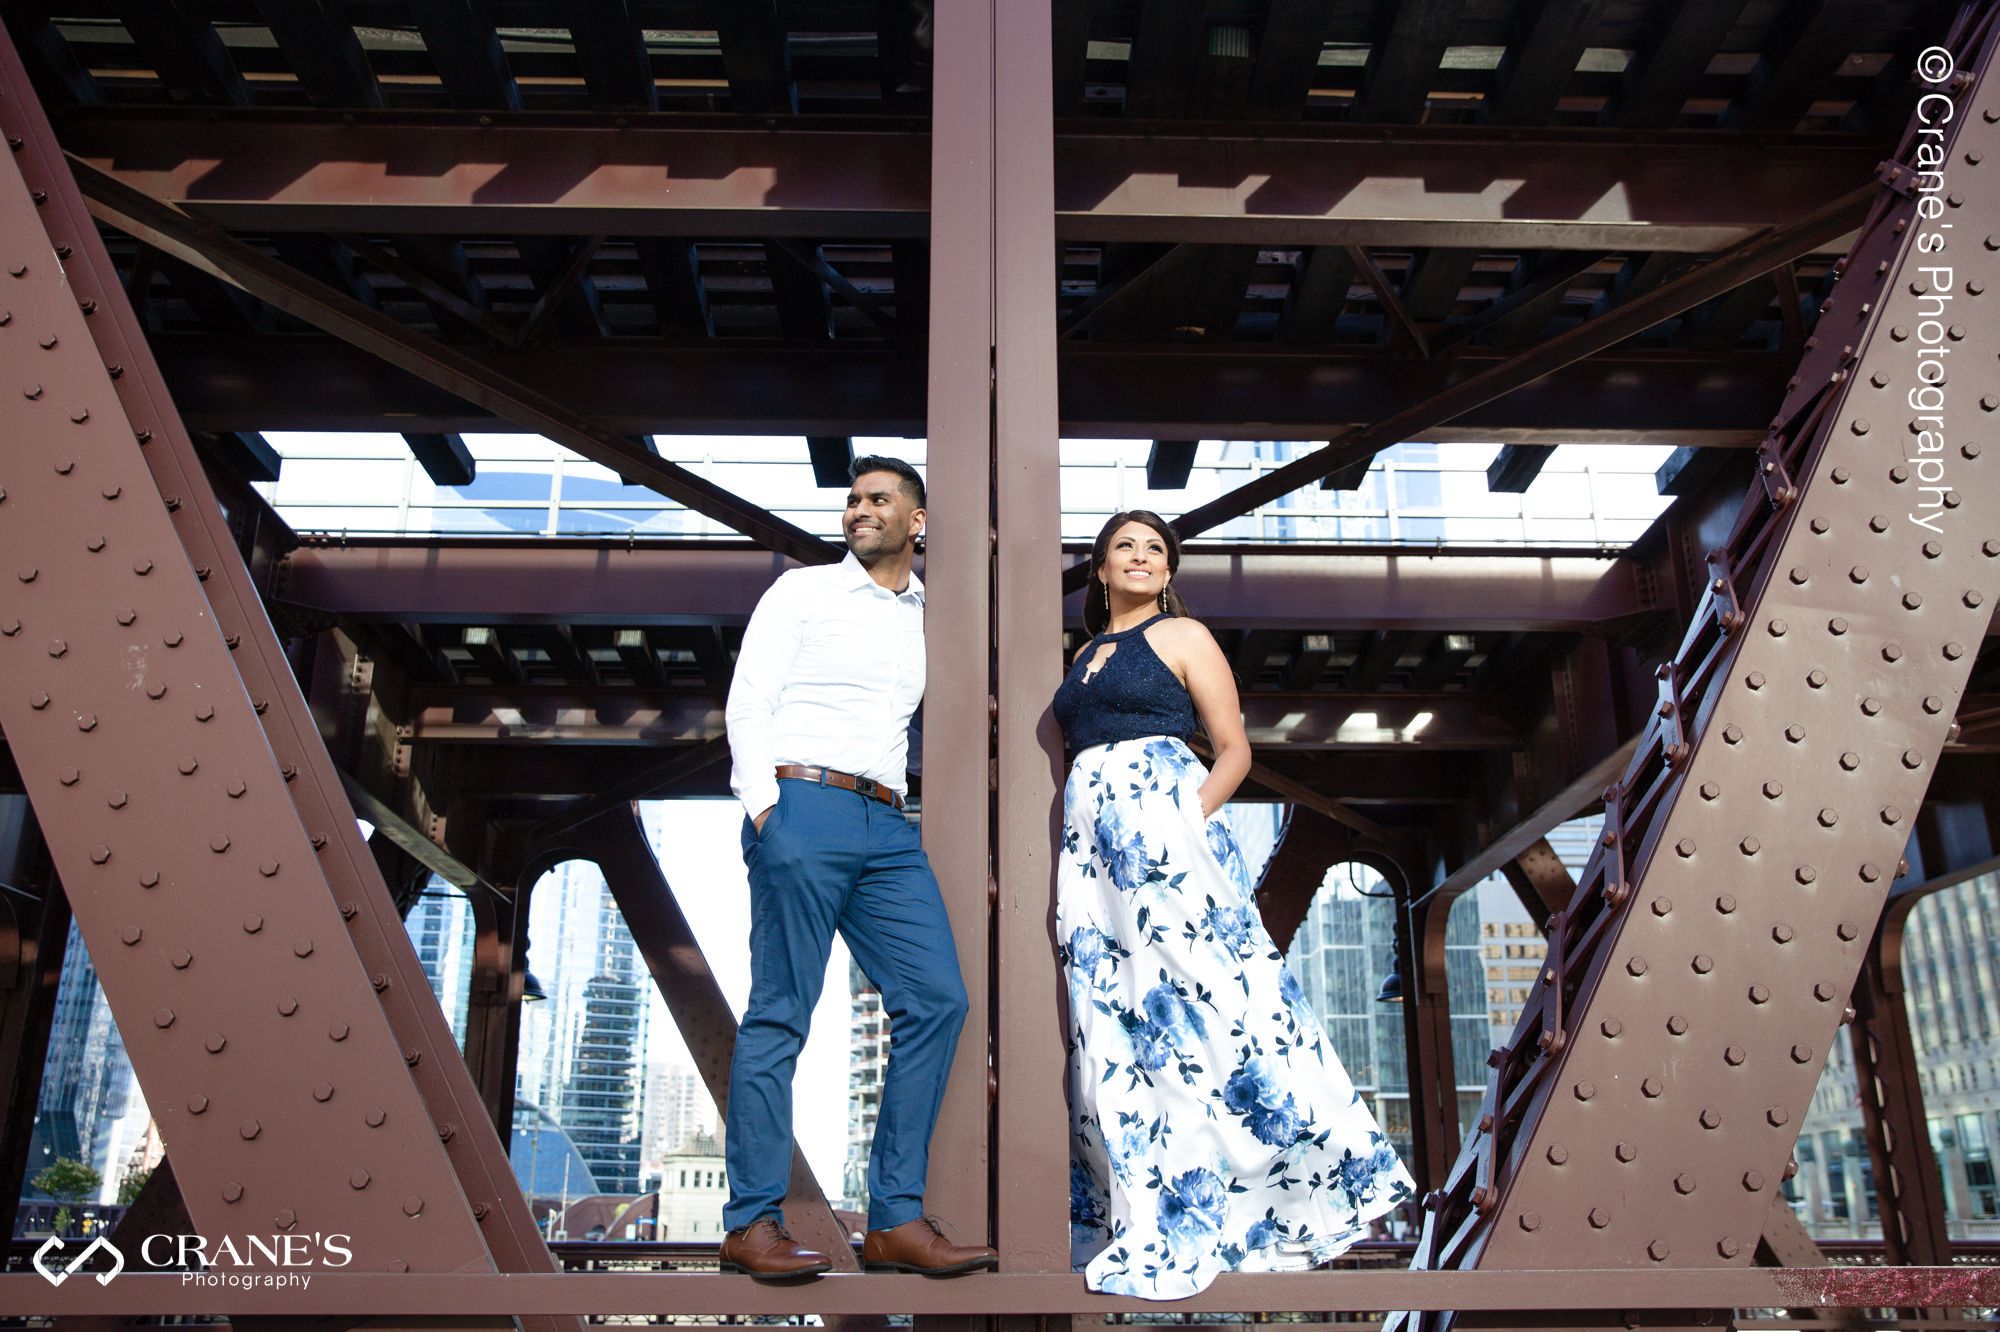 Engagement photo taken on one of the bridges in downtown Chicago